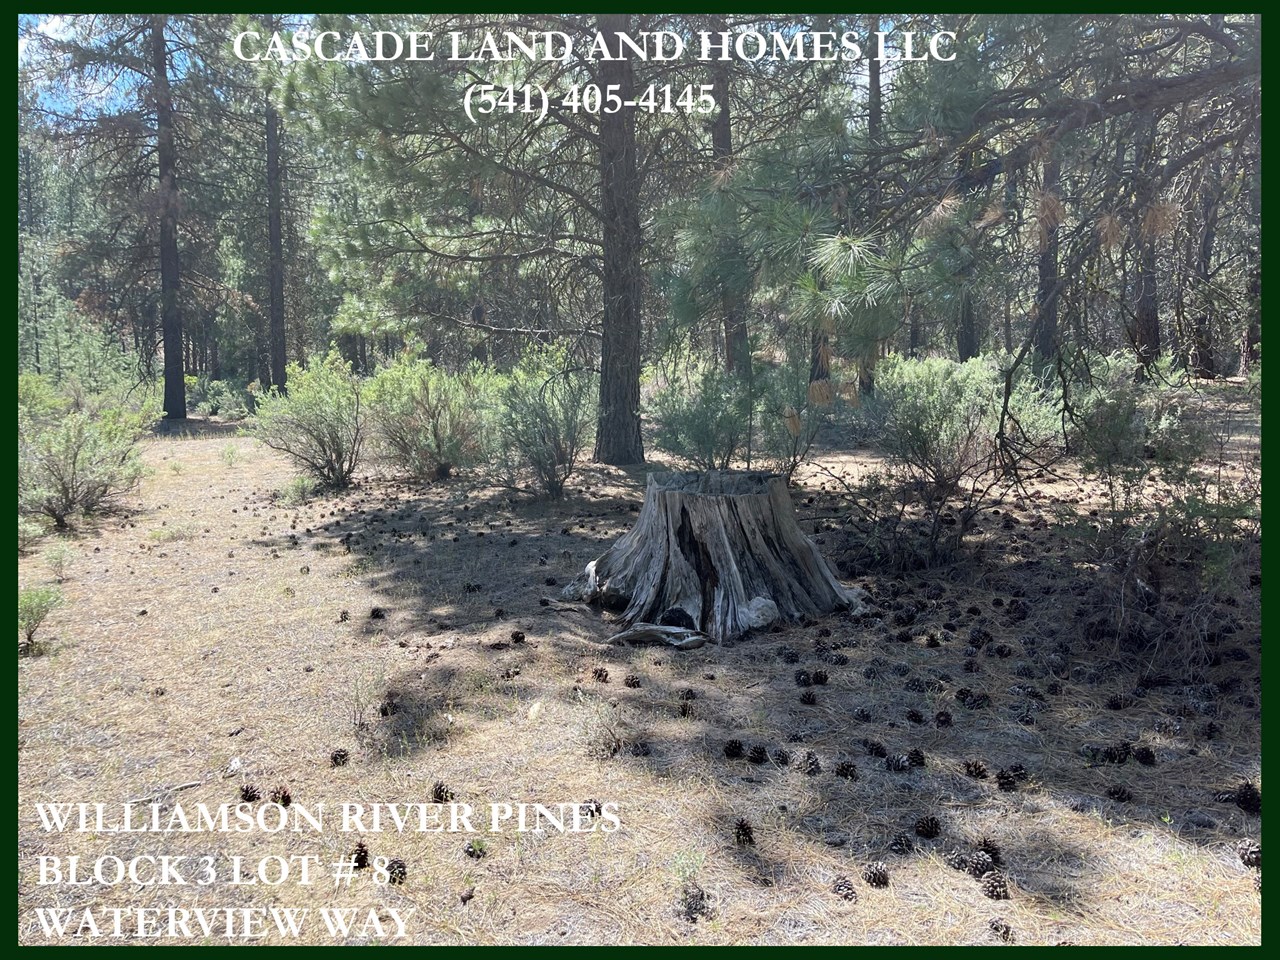 the property is at the end of a quiet cul-de-sac with very few neighbors. it's so peaceful here, just where you would want to build your new home if you are looking for a quieter lifestyle with the wilderness surrounding you!